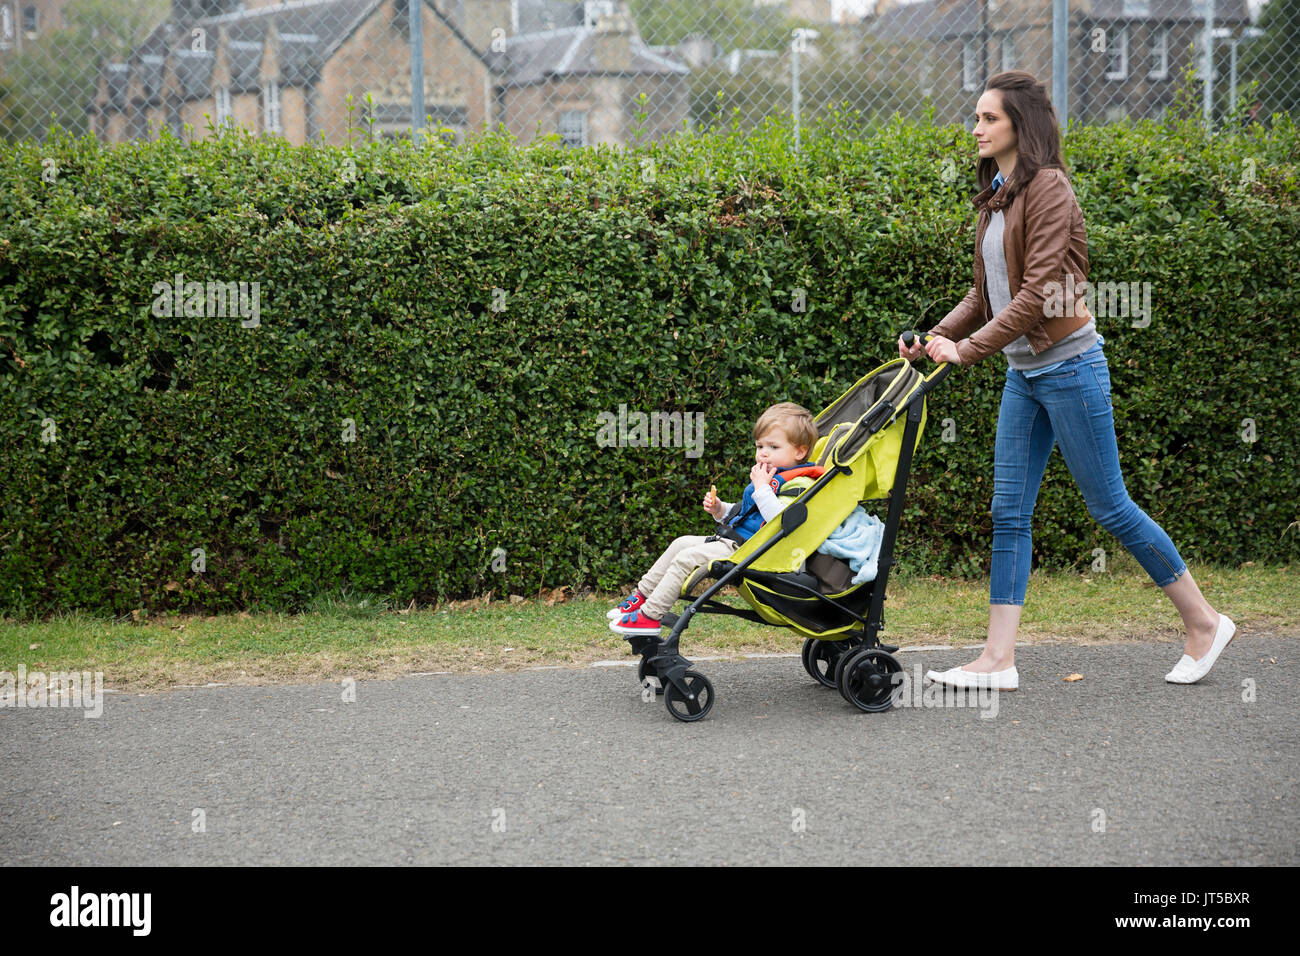 Side view of a Caucasian Mum walking on city street while pushing her toddler sitting in a pram. Stock Photo